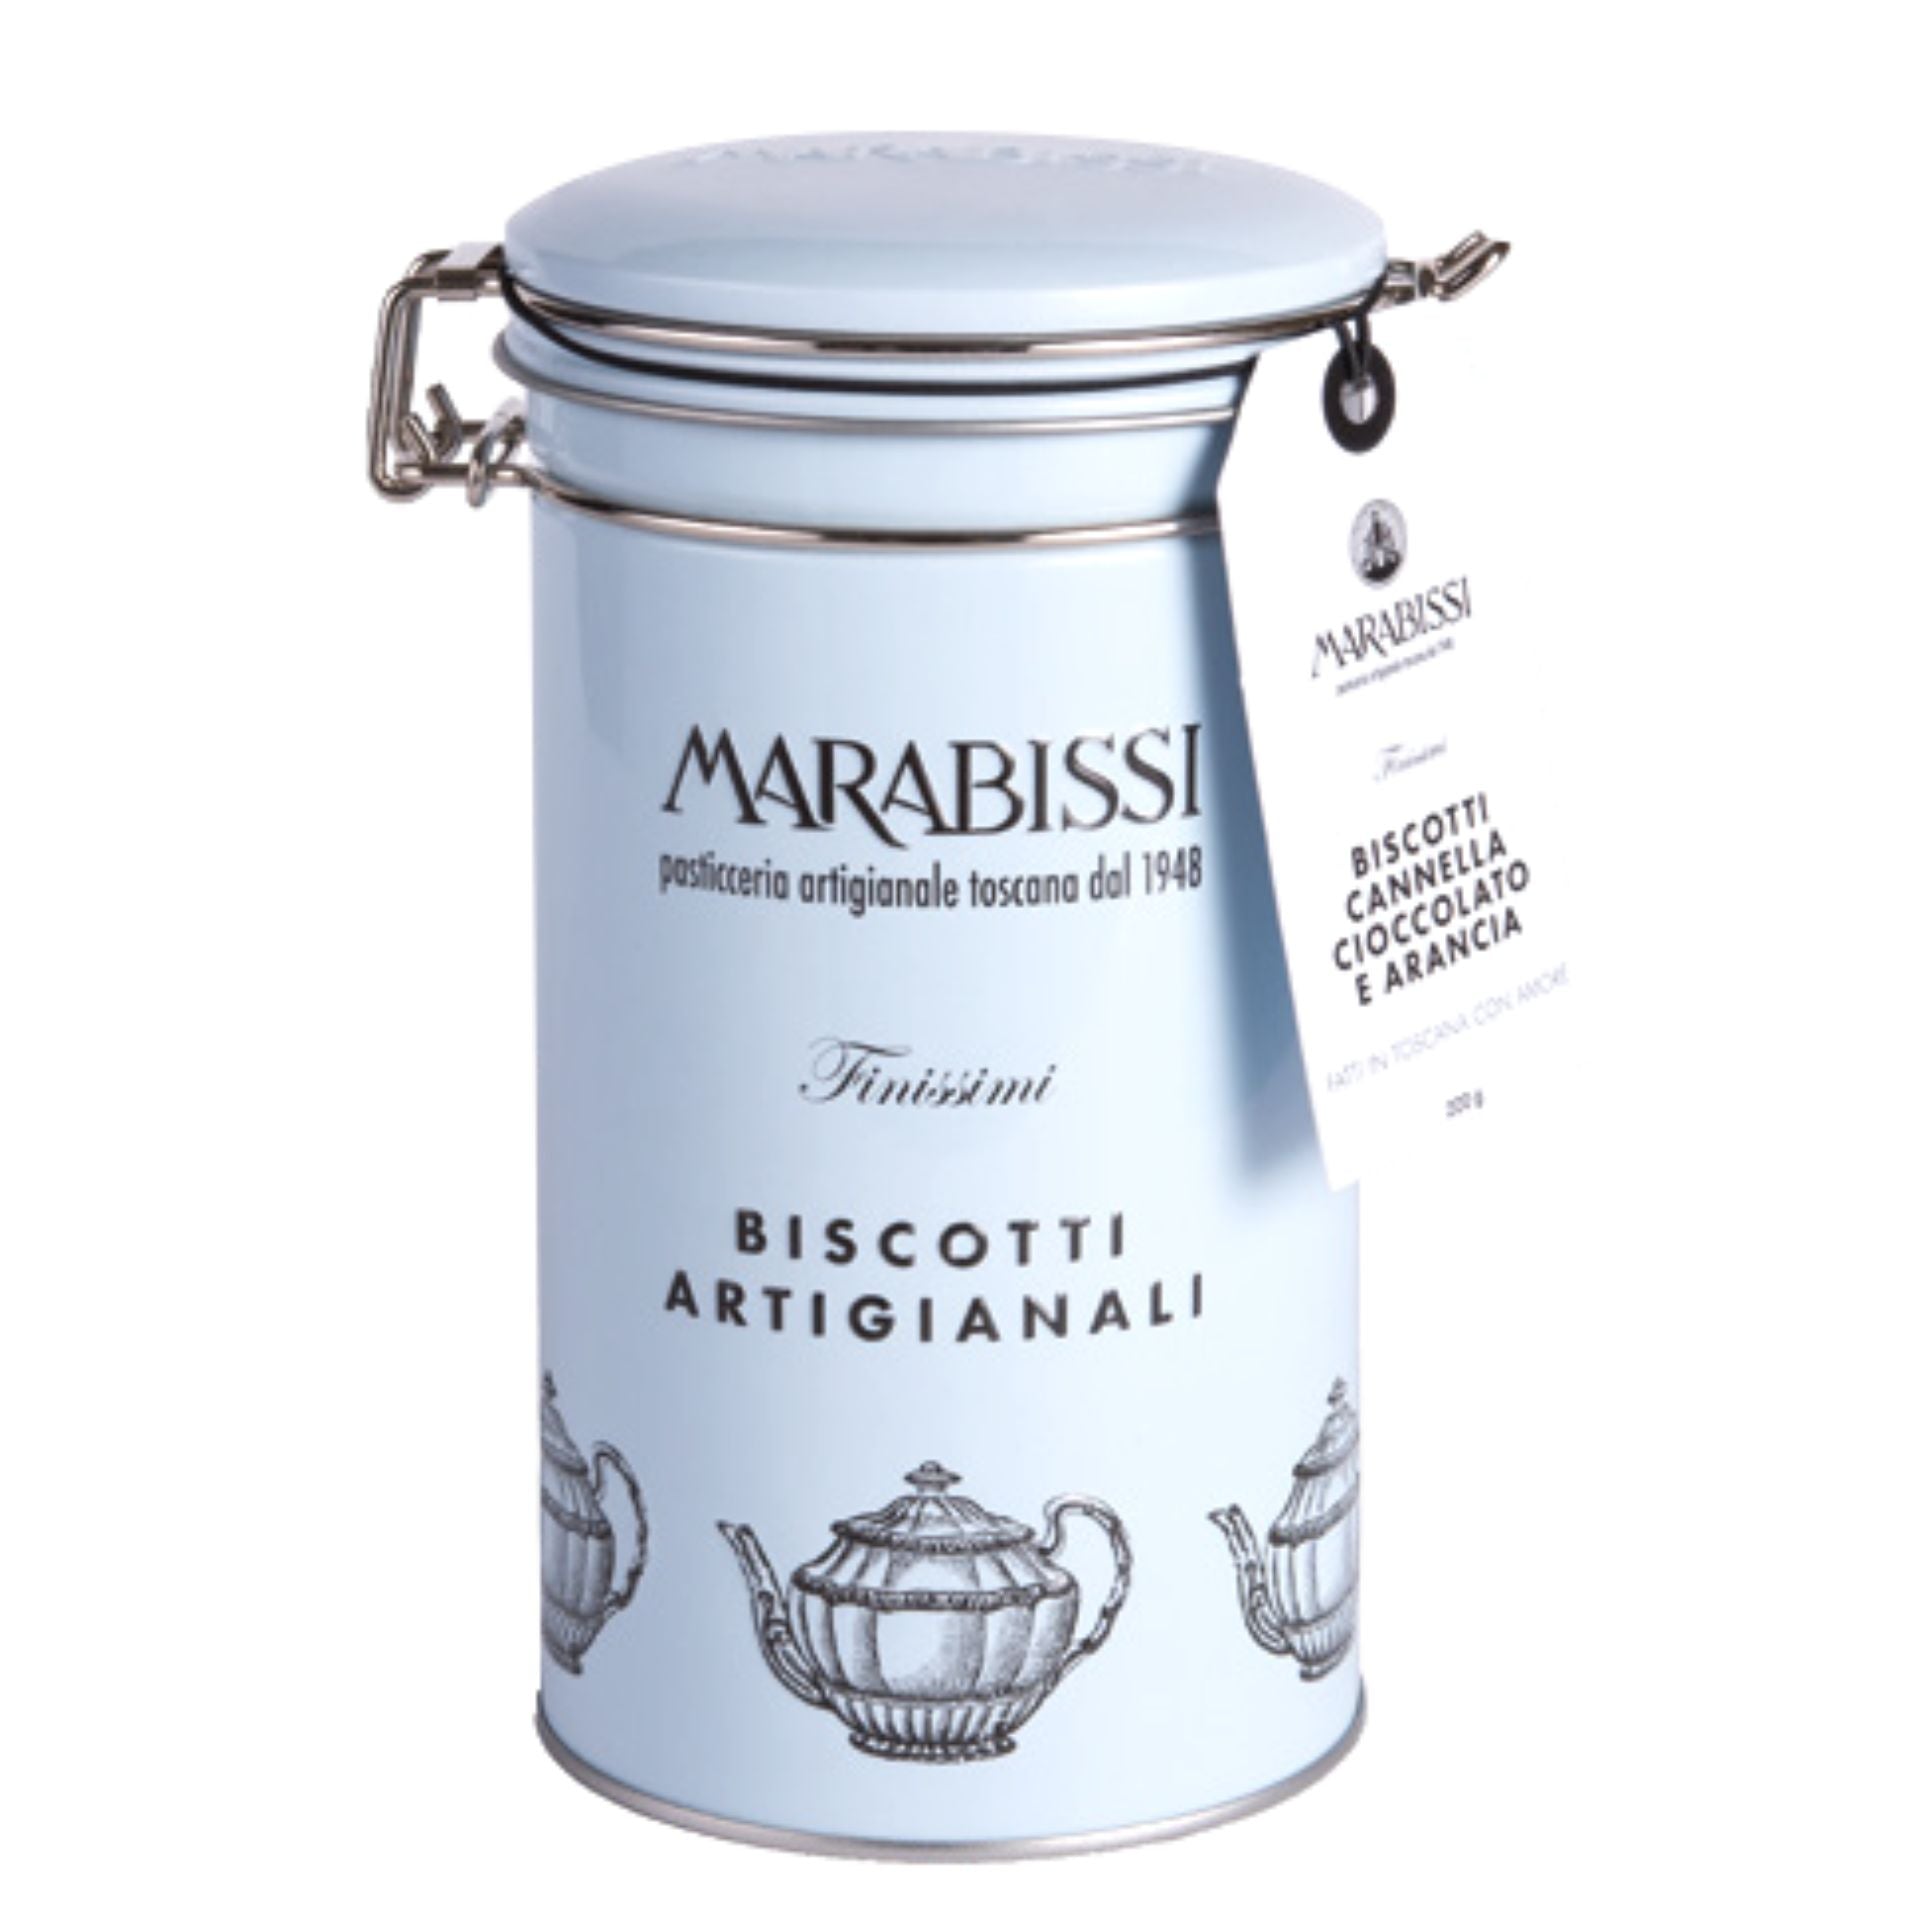 Marabissi Chocolate, Cinnamon & Orange Artisan Biscuits (Tin) 200g  | Imported and distributed in the UK by Just Gourmet Foods